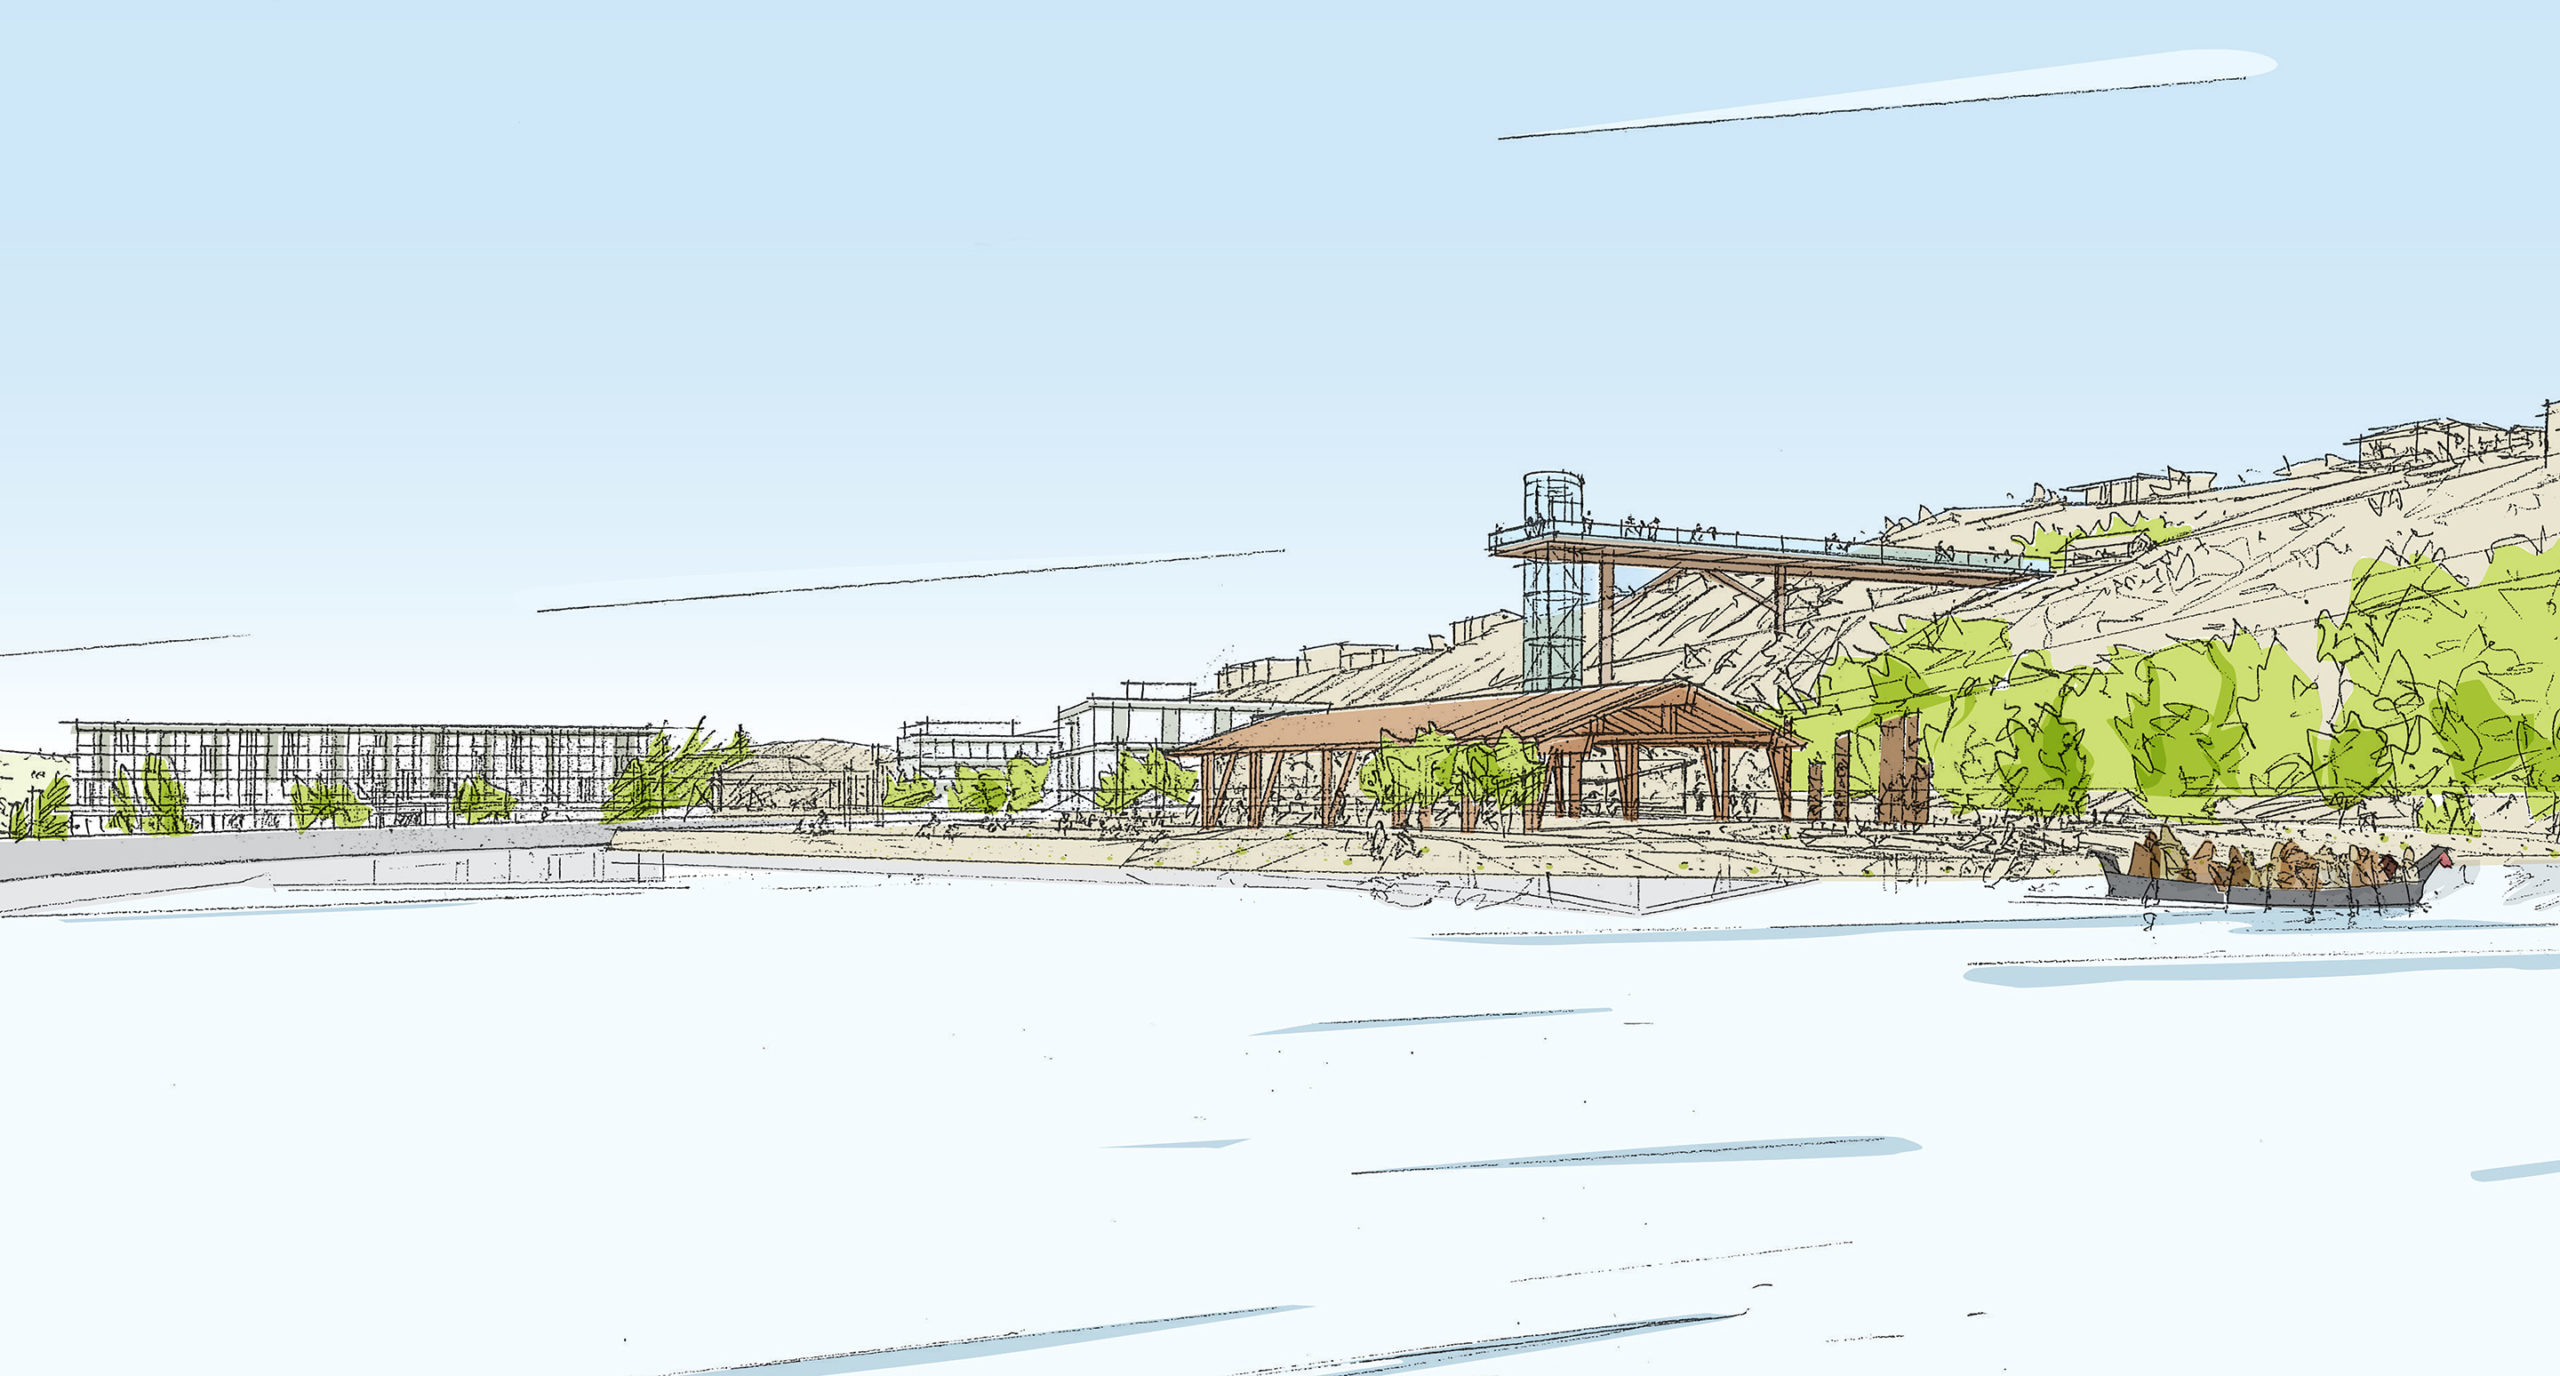 Architect's drawing of the Willamette Falls redevelopment.